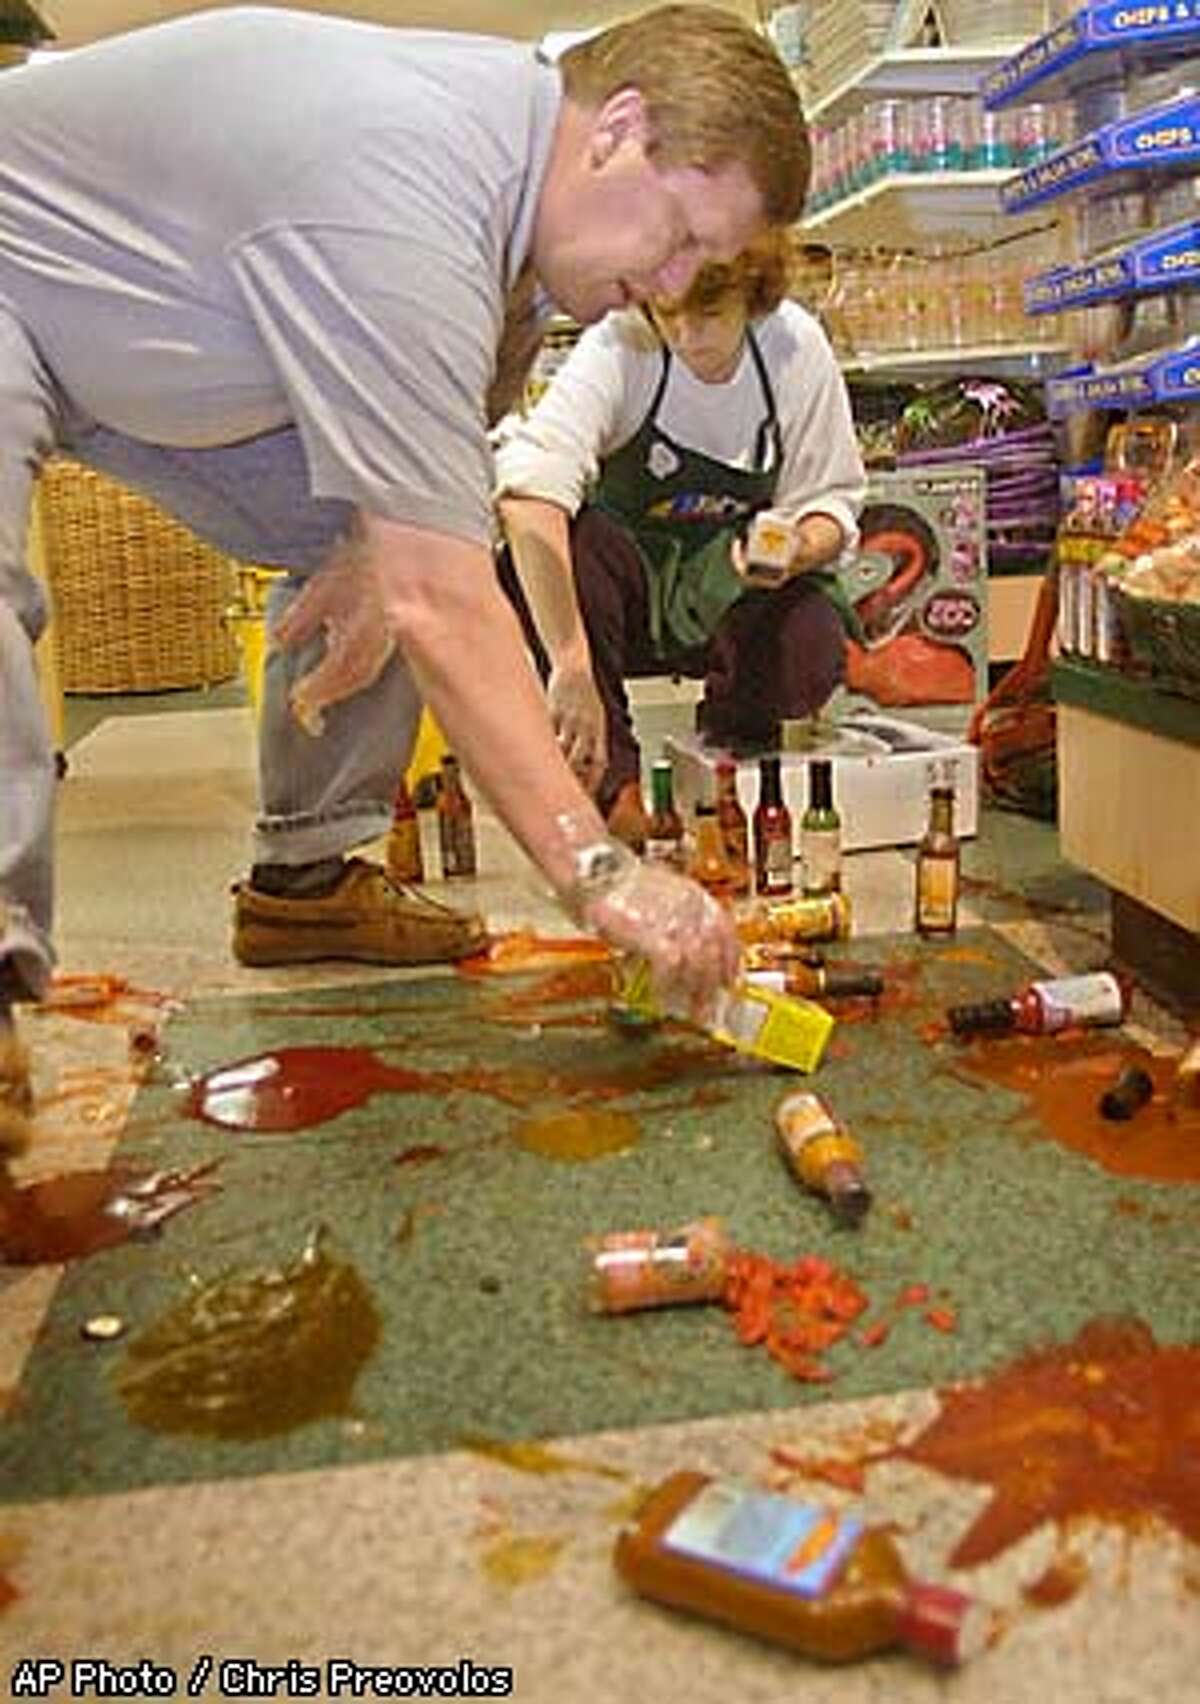 Randy Christensen, left, and his wife, Linda, manager of the Le Gourmet Chef outlet store, in Gilroy, Calif., clean up broken bottles of hot sauce after an earthquake with a preliminary magnitude of 5.2 struck, Monday, May 13, 2002. The U.S. Geological Service reported that the quake struck at 10 p.m. and was centered 3 miles southwest of Gilroy, outside San Jose. No injuries or significant damage was reported. (AP Photo / Chris Preovolos)